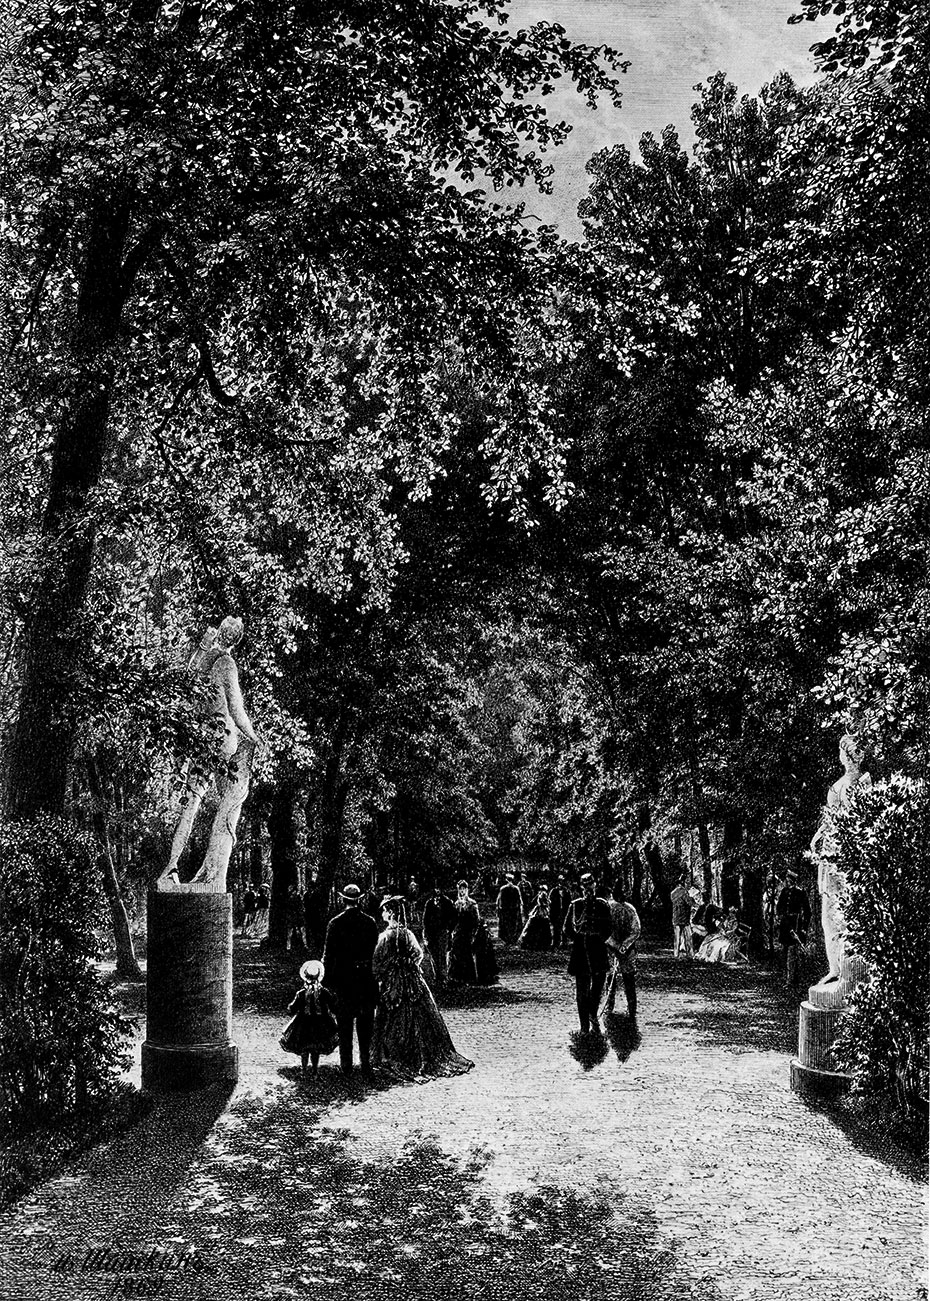 29. A walk in the summer gardens, St. Petersburg. 1869. Pen and ink on paper. 54.5X40.1 cm. The Russian Museum, Leningrad